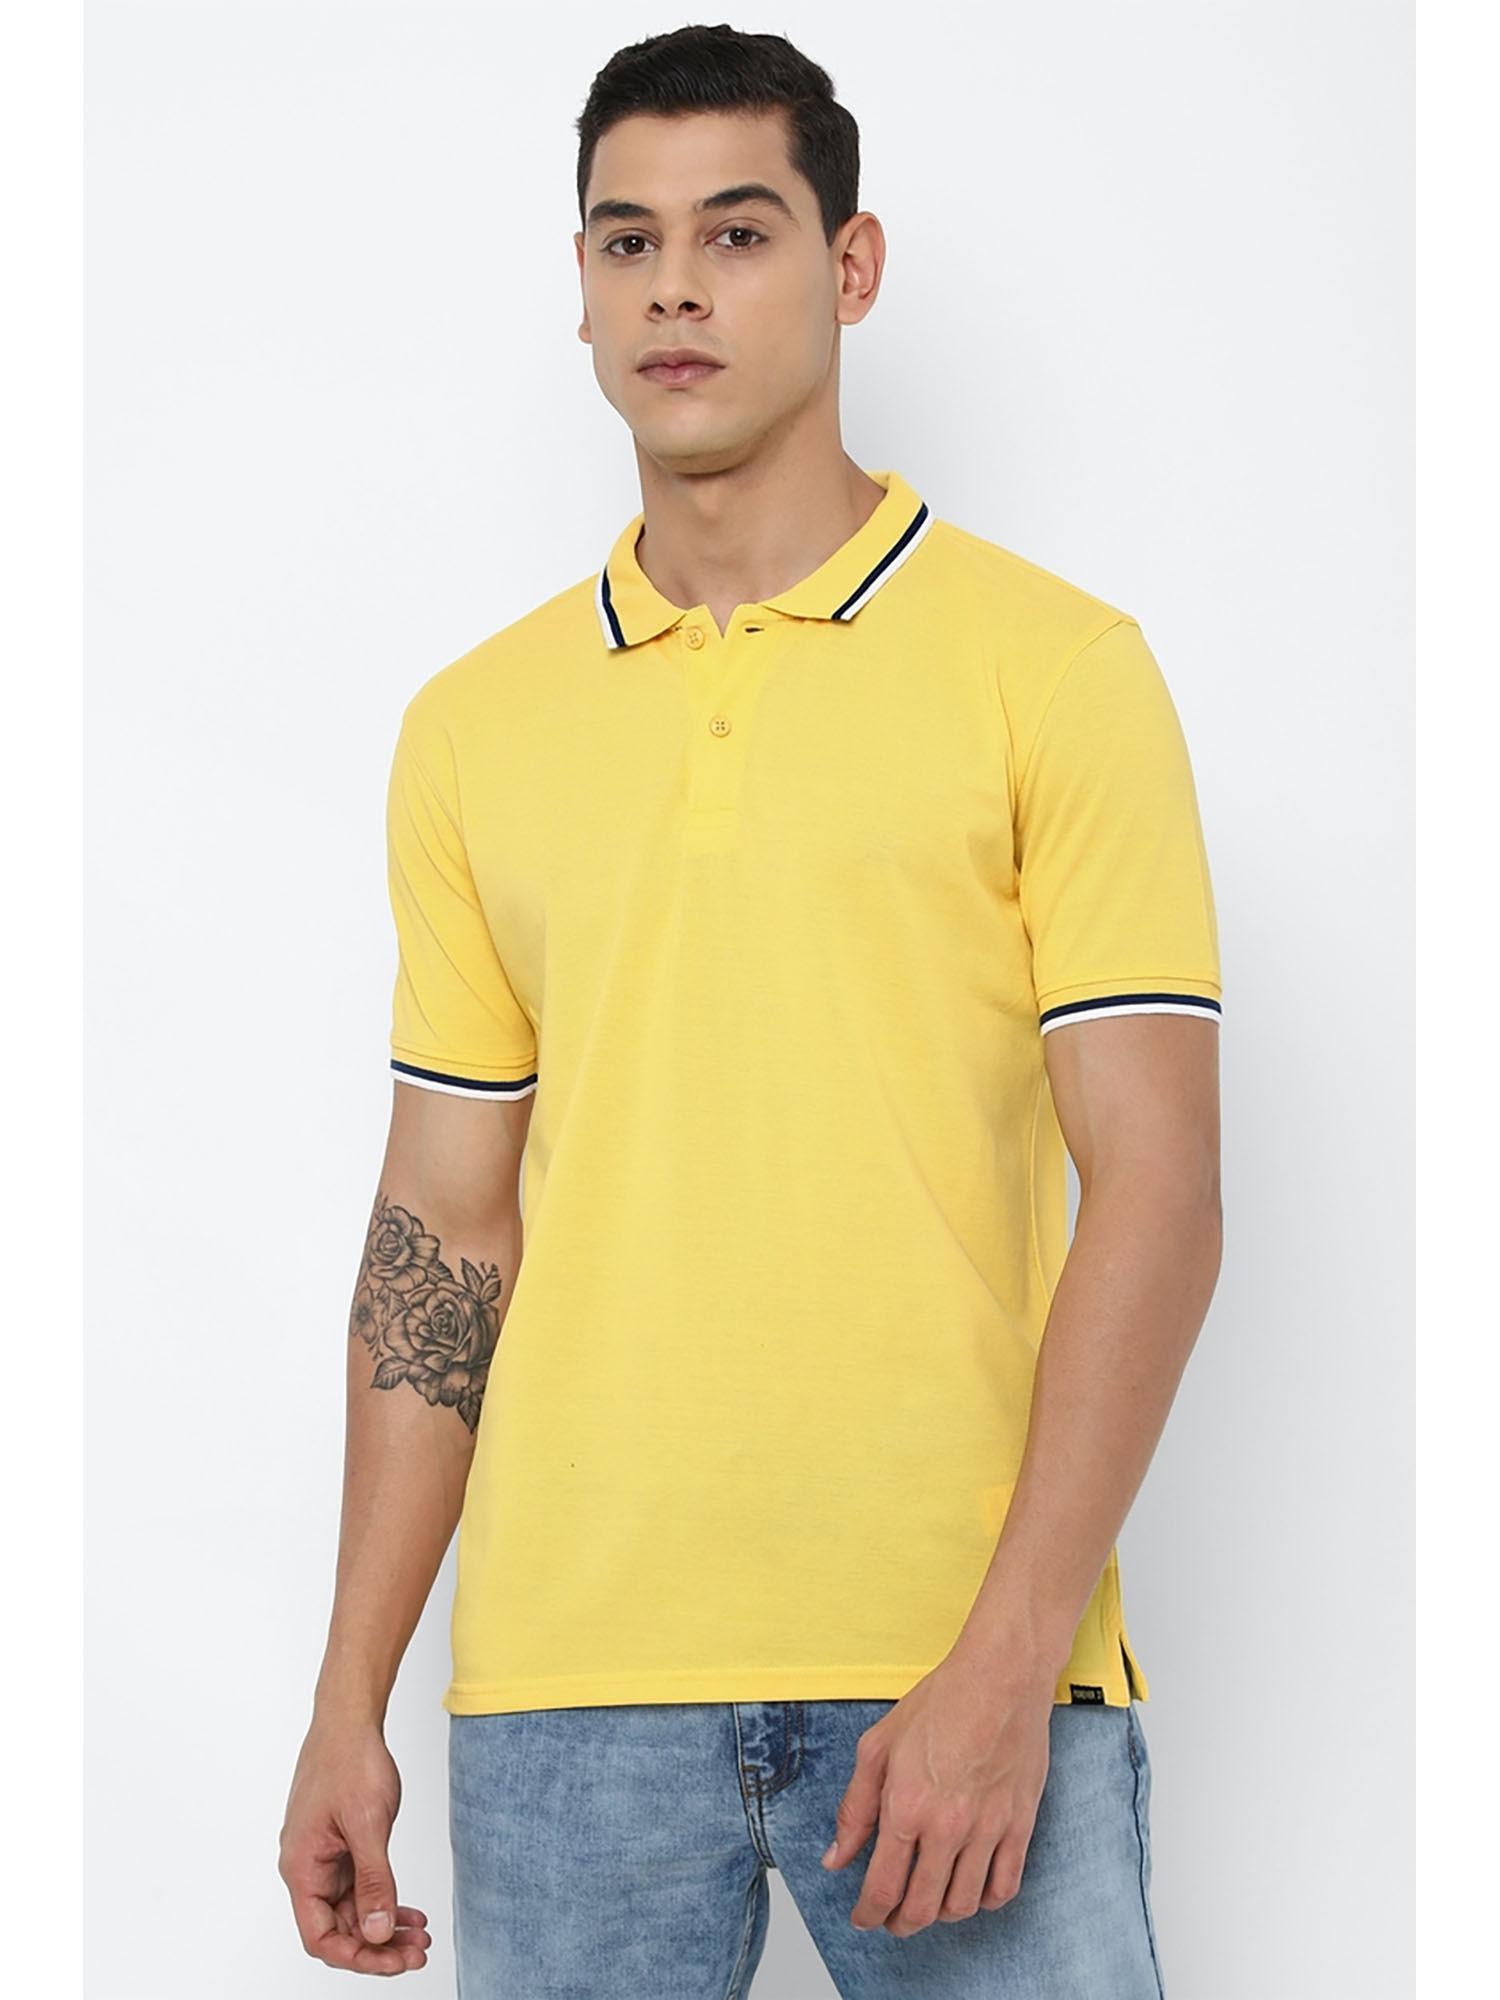 solid yellow solid tshirts